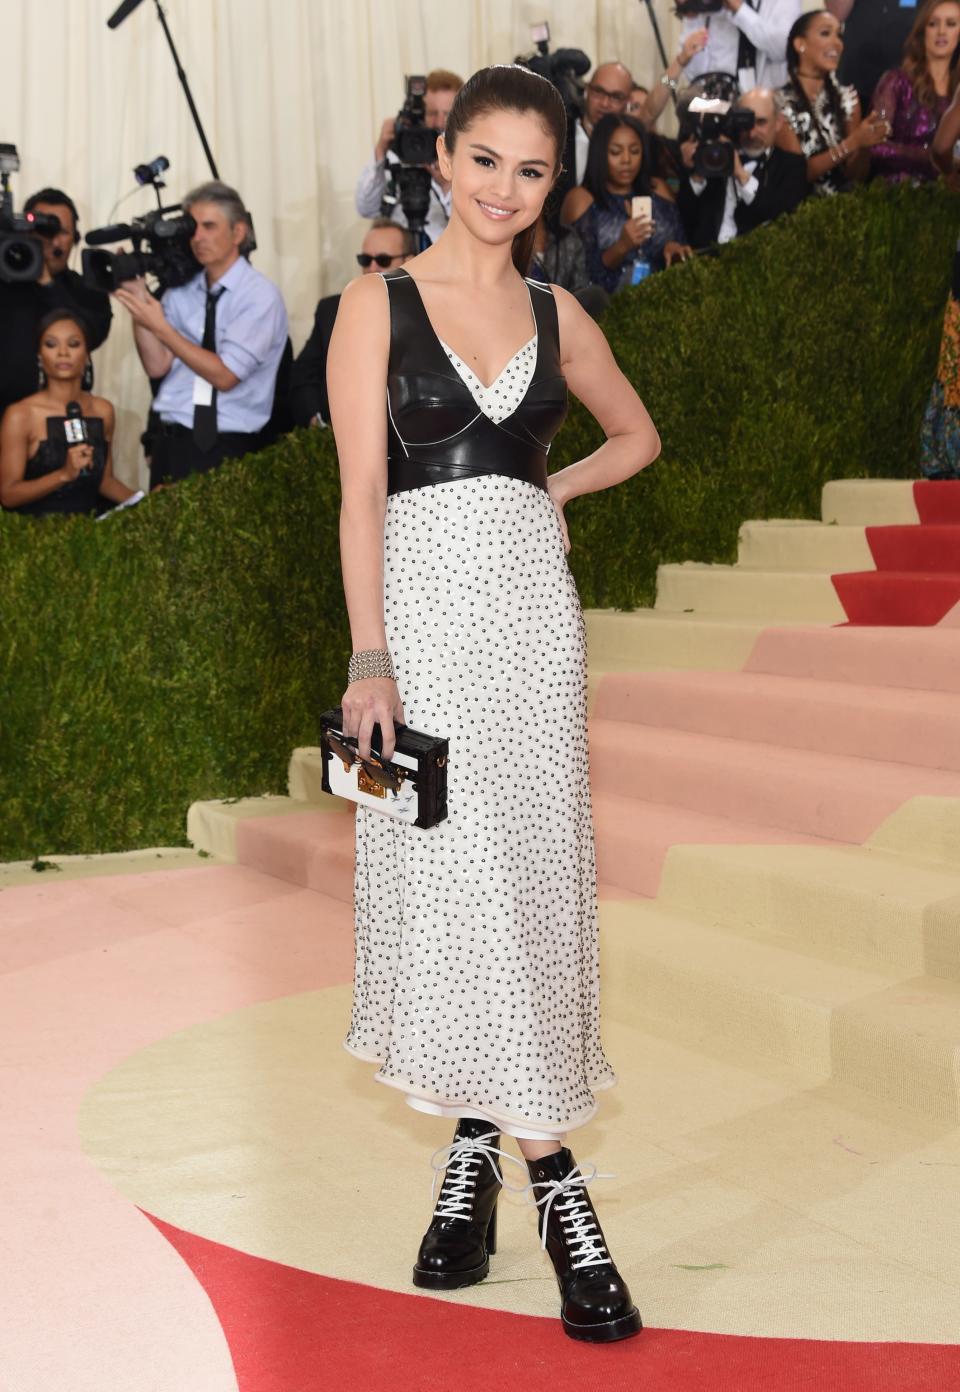 <p>Selena wore her edgiest look yet to the 2016 Met Gala, layering a sleek bra over a printed Louis Vuitton dress and finishing the look with lace-up combat boots. She clearly <em>nailed</em> the night's futuristic theme.</p>